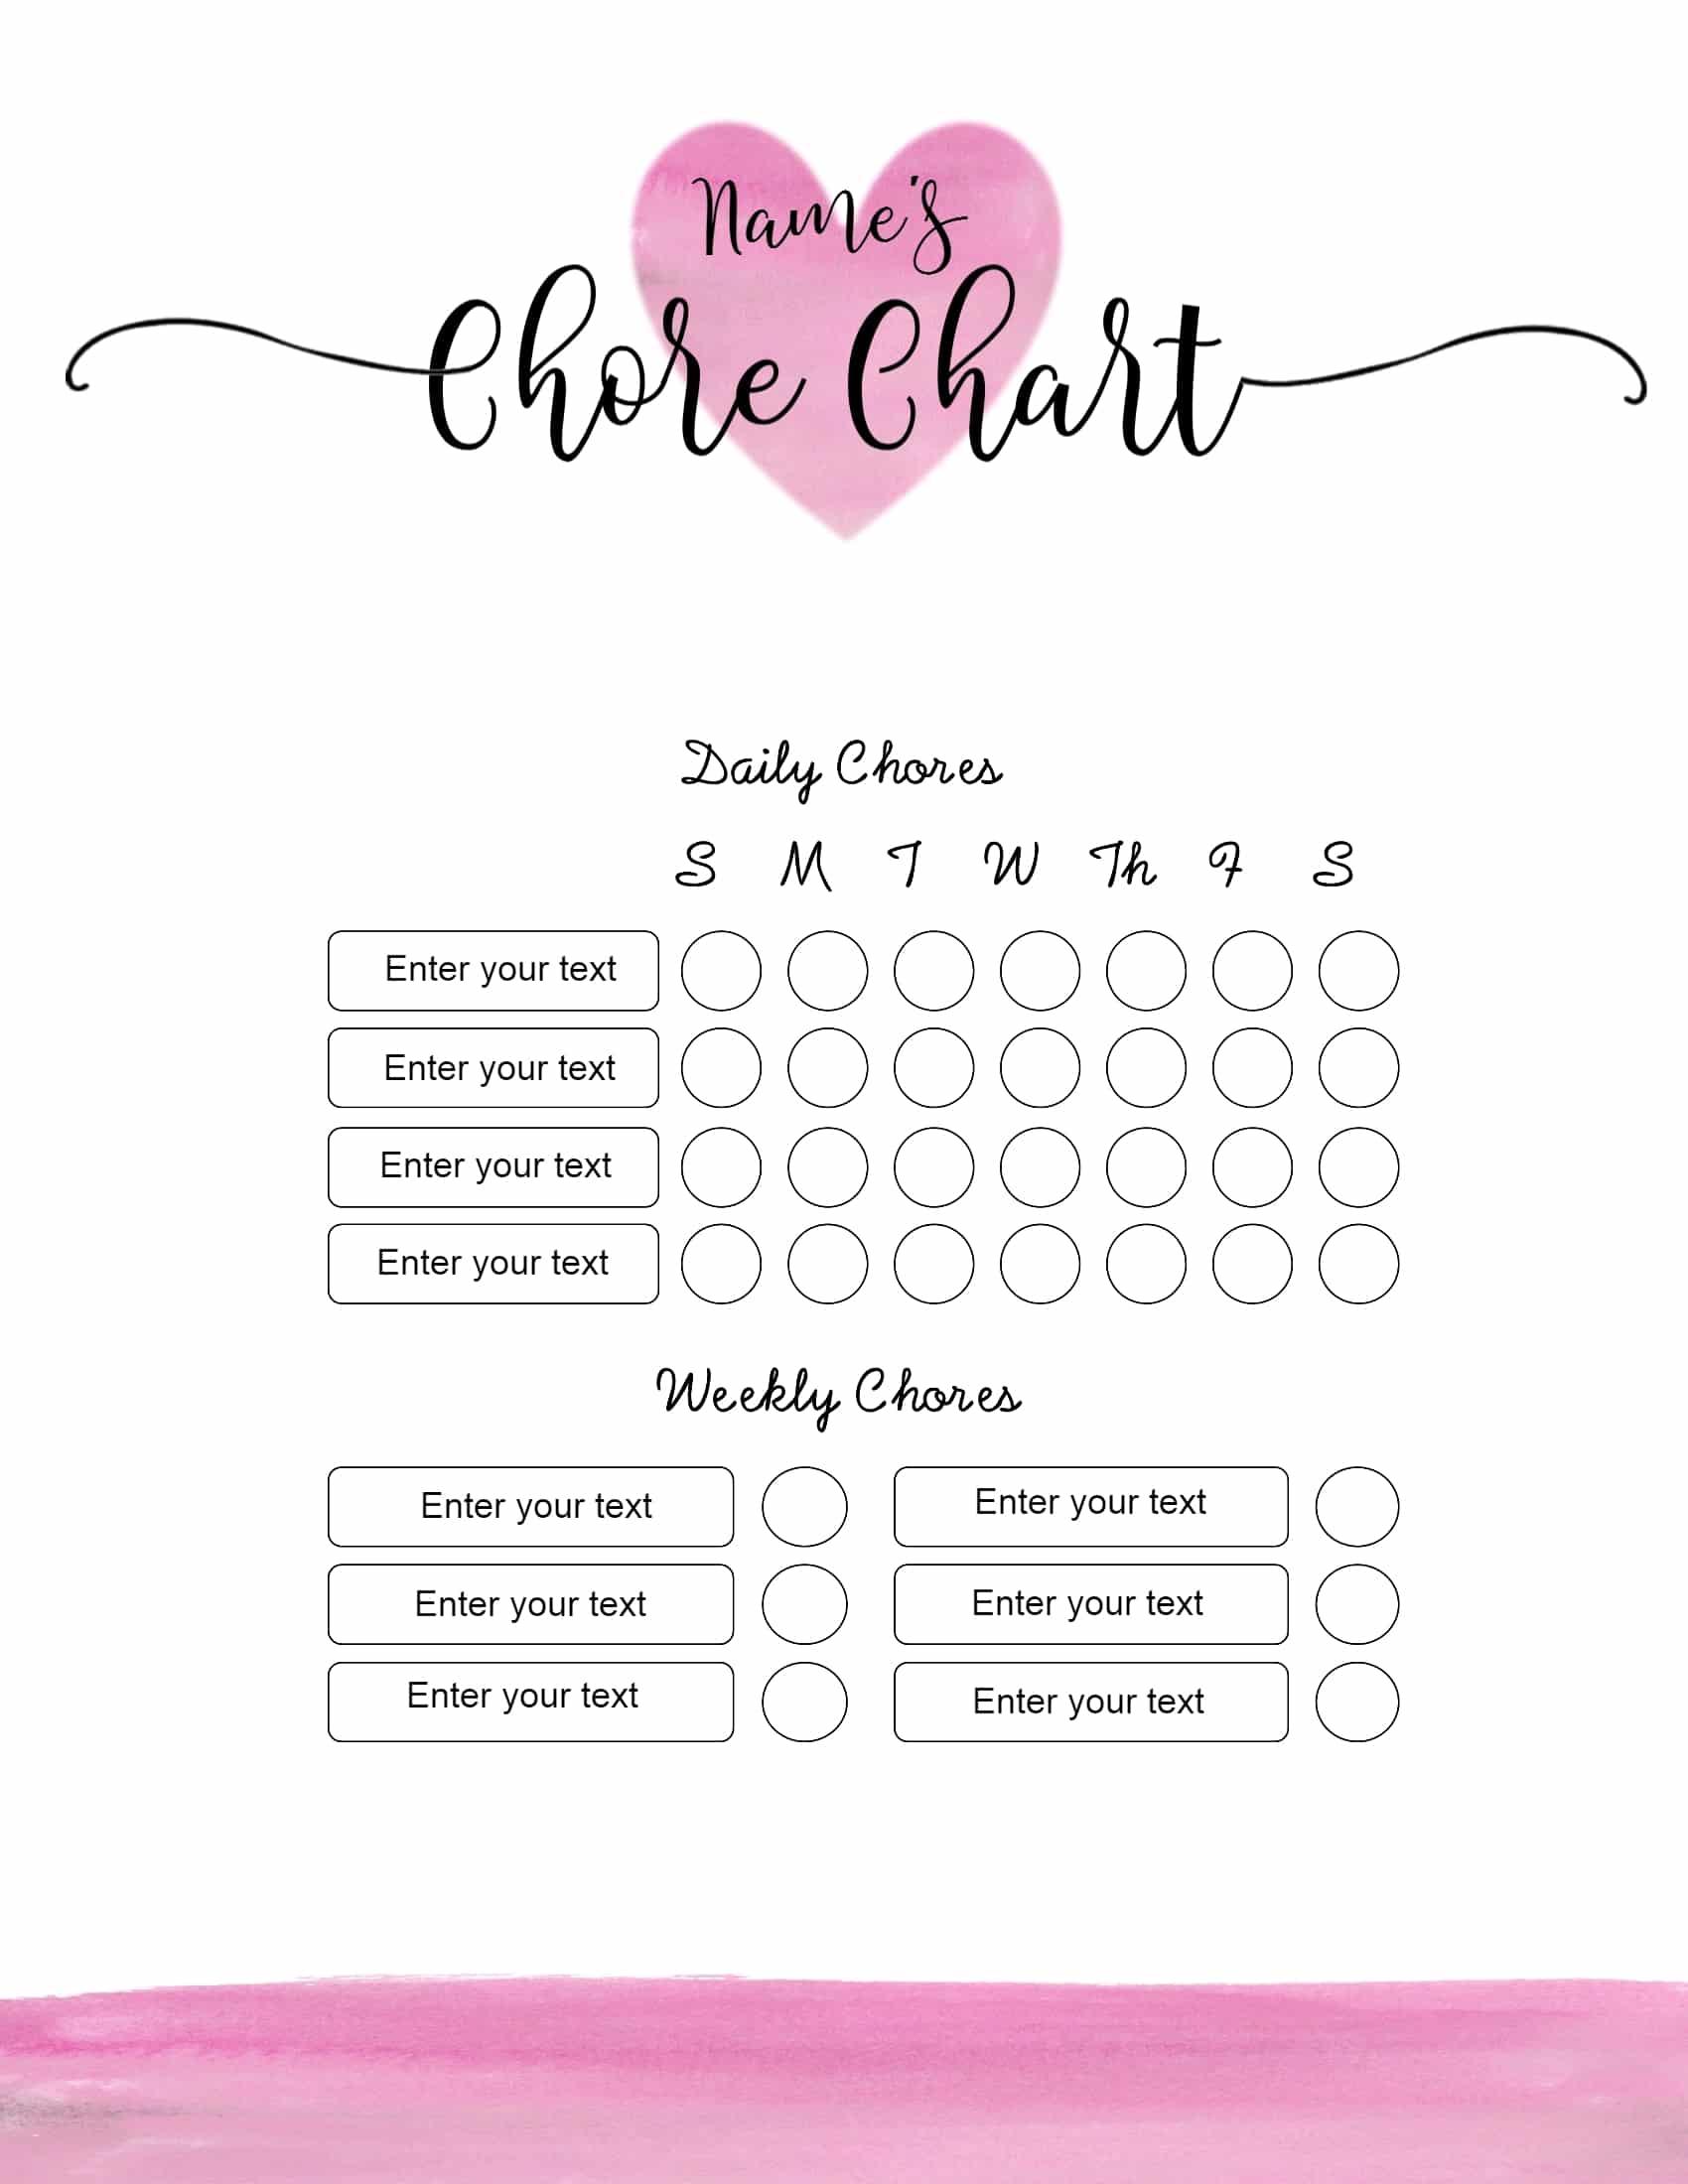 Weekly Chore Template from www.101planners.com